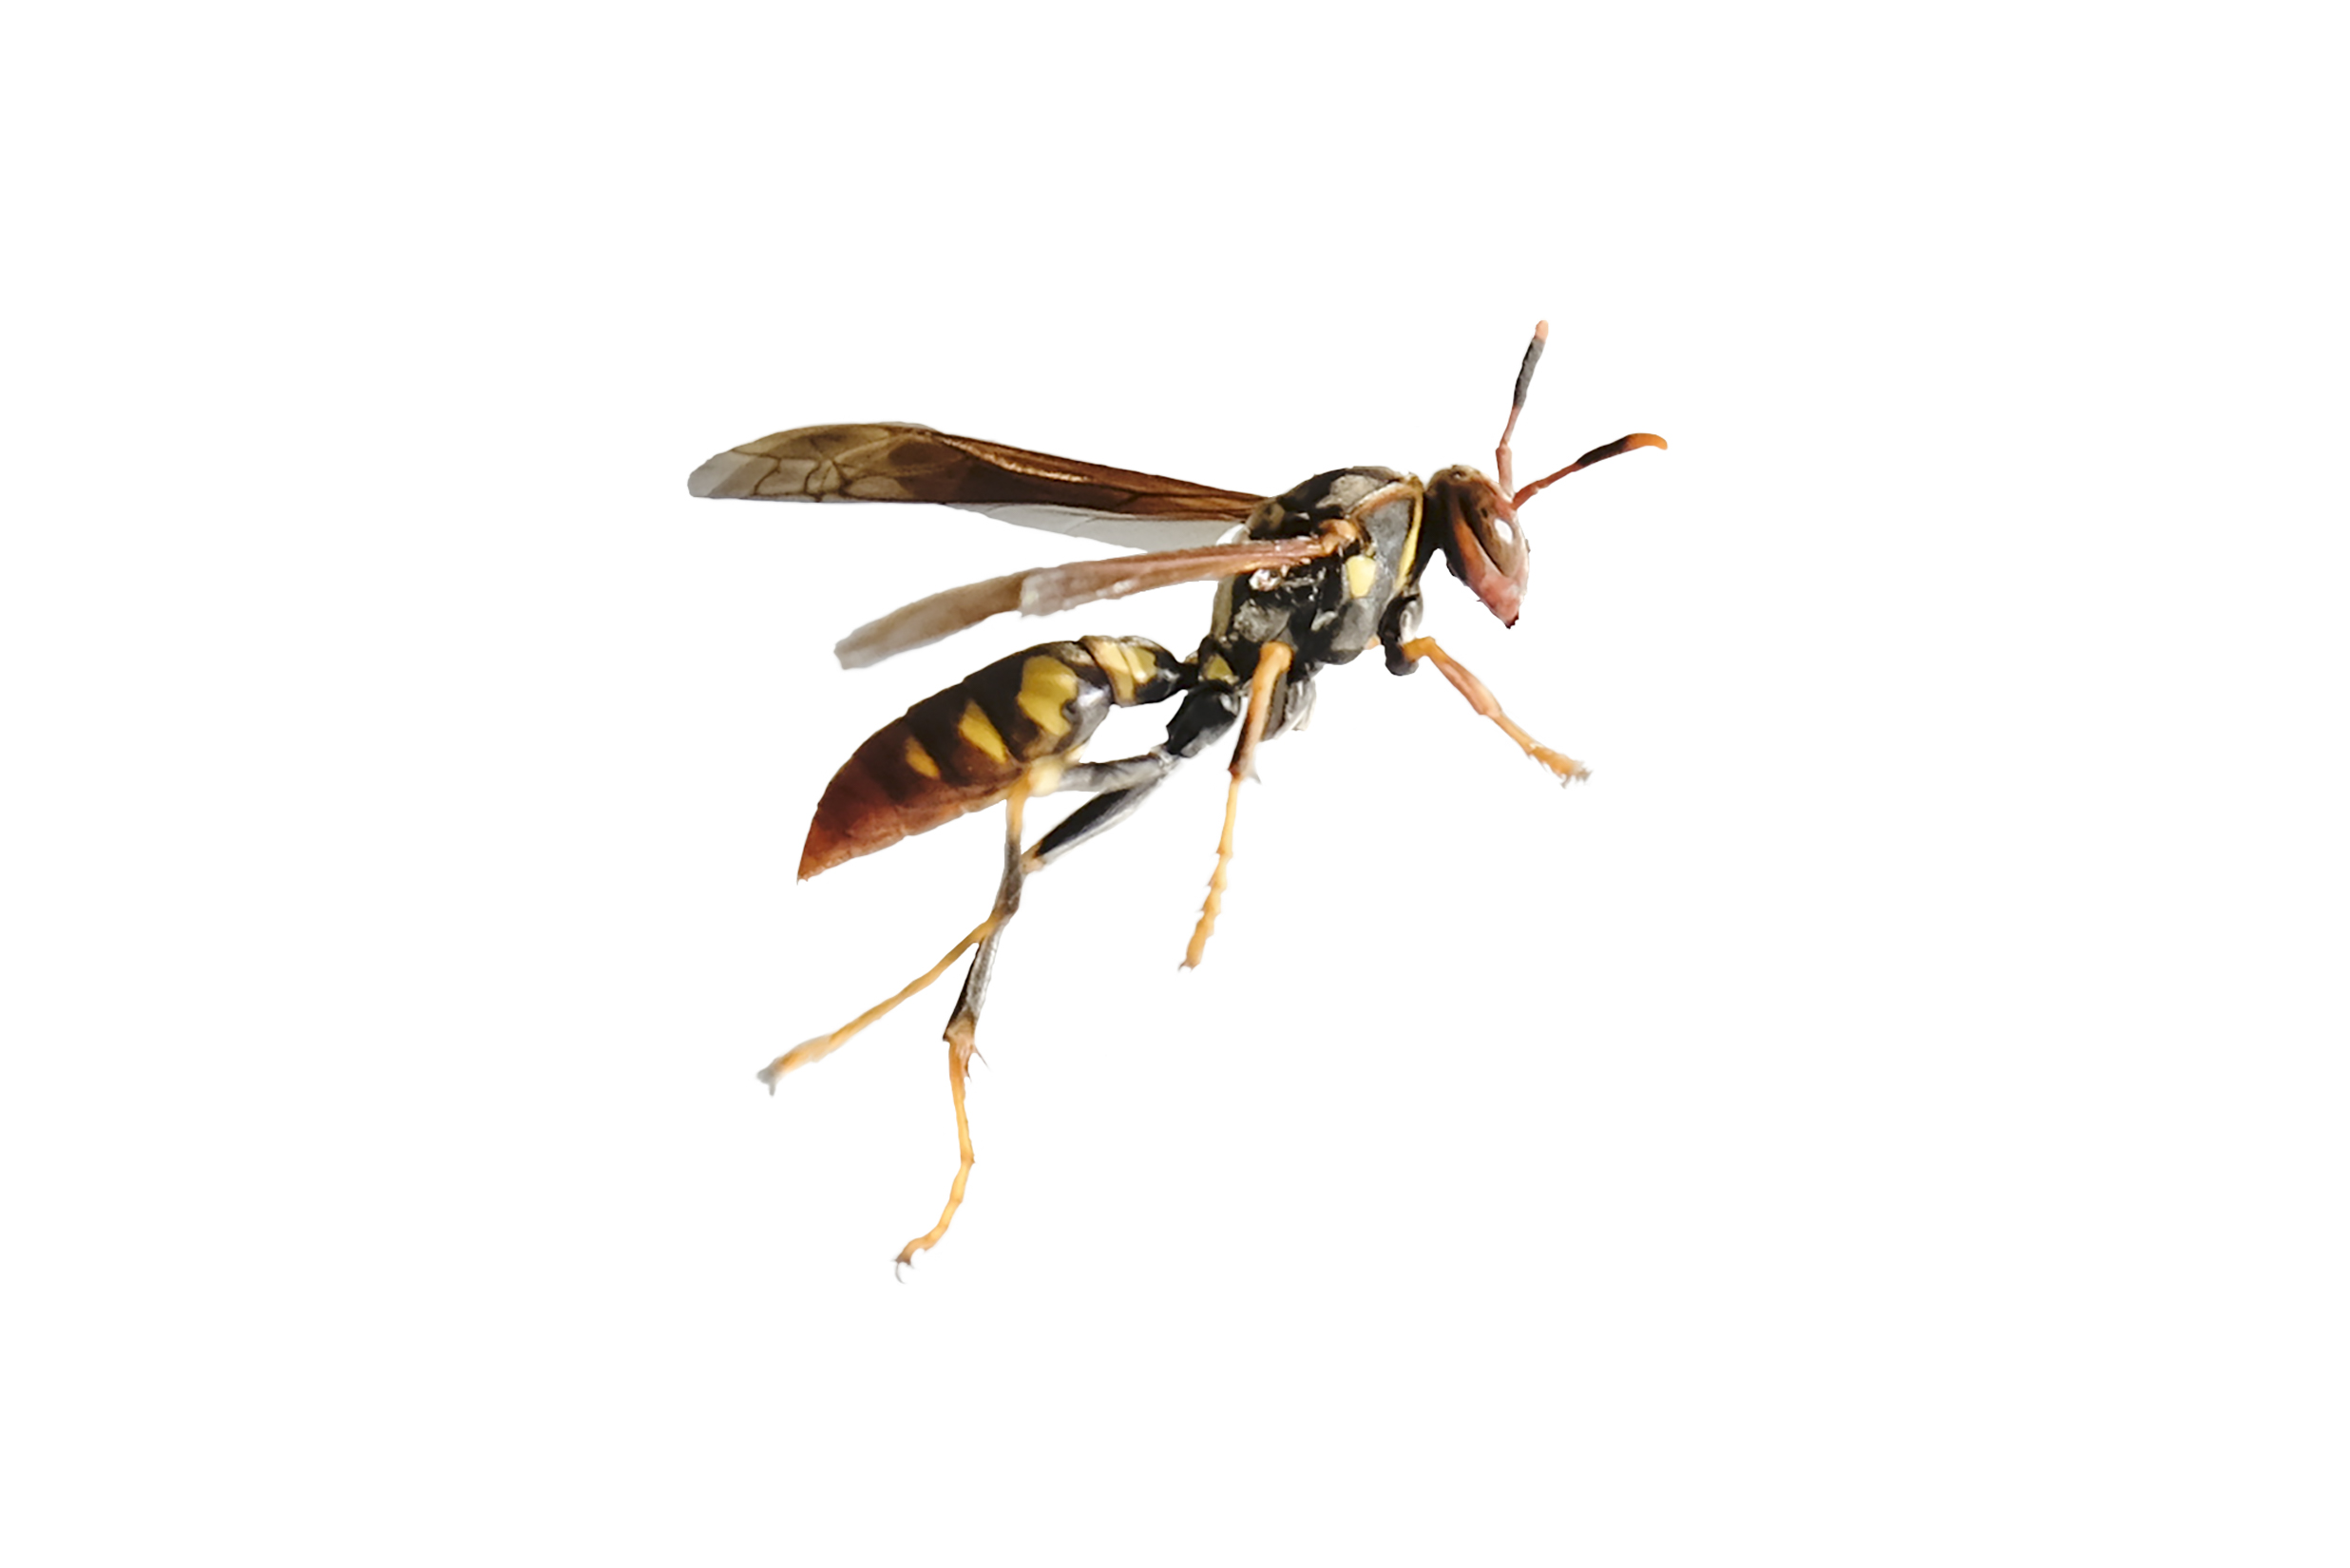 1857, 1857, Large Wasp (Hornet) On A White Background (Found In Northern Peru), iStock-1222676943.jpg, 256272, https://essentialys.com/wp-content/uploads/2021/02/iStock-1222676943.jpg, https://essentialys.com/lutte-prevention-insectes/la-guepe/large-wasp-hornet-on-a-white-background-found-in-northern-peru/, , 6, , Large Wasp (Hornet) On A White Background (Found In Northern Peru), large-wasp-hornet-on-a-white-background-found-in-northern-peru, inherit, 1856, 2021-02-22 09:11:39, 2021-02-22 09:11:39, 0, image/jpeg, image, jpeg, https://essentialys.com/wp-includes/images/media/default.png, 2473, 1650, Array